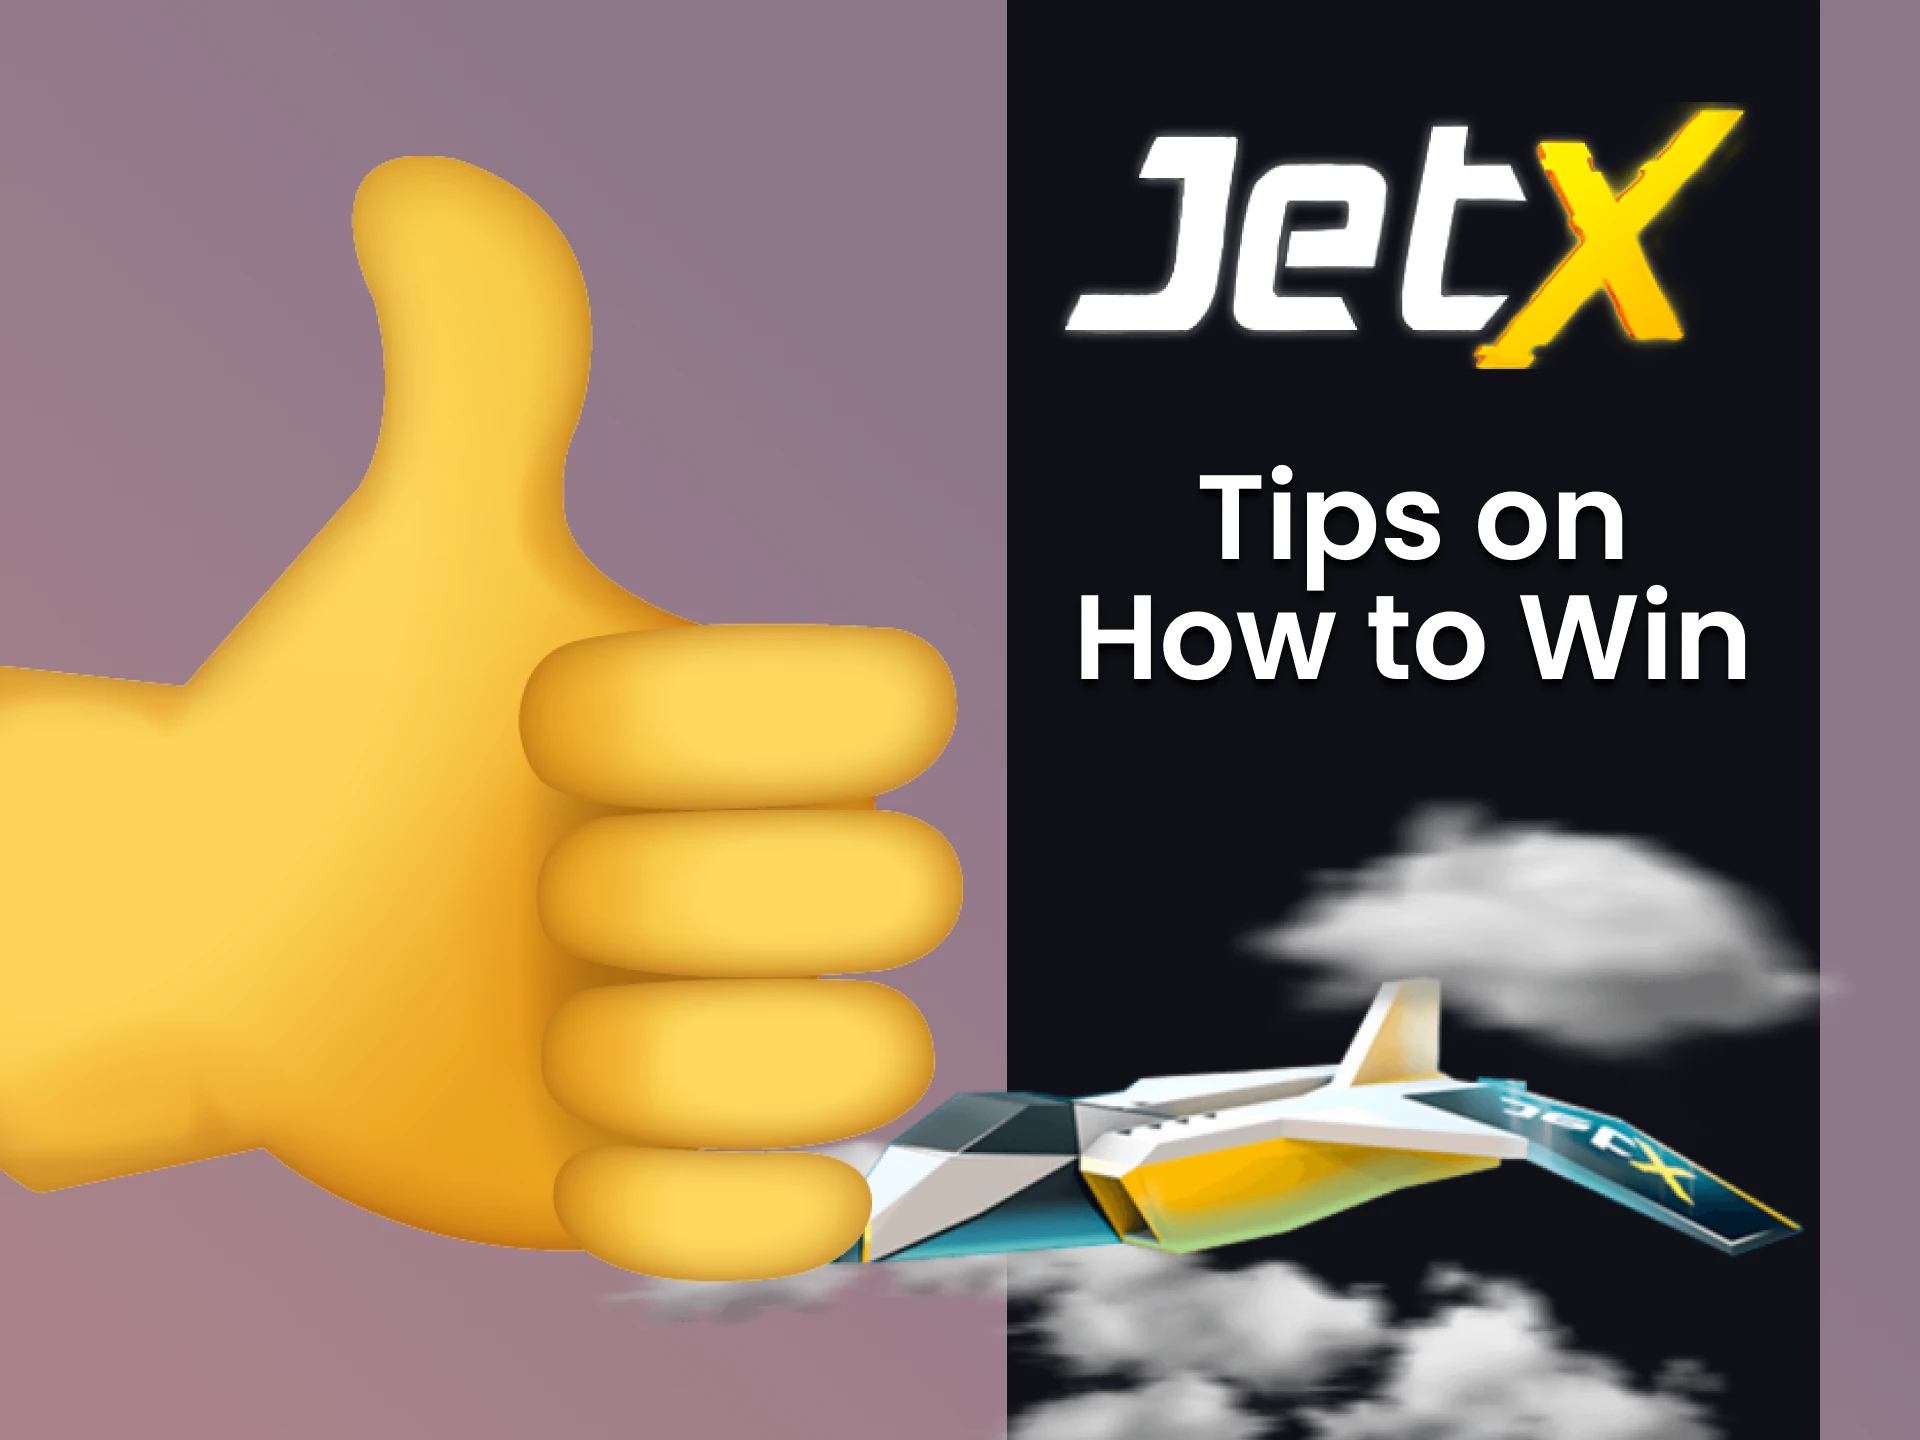 We will provide tips to win the JetX game.